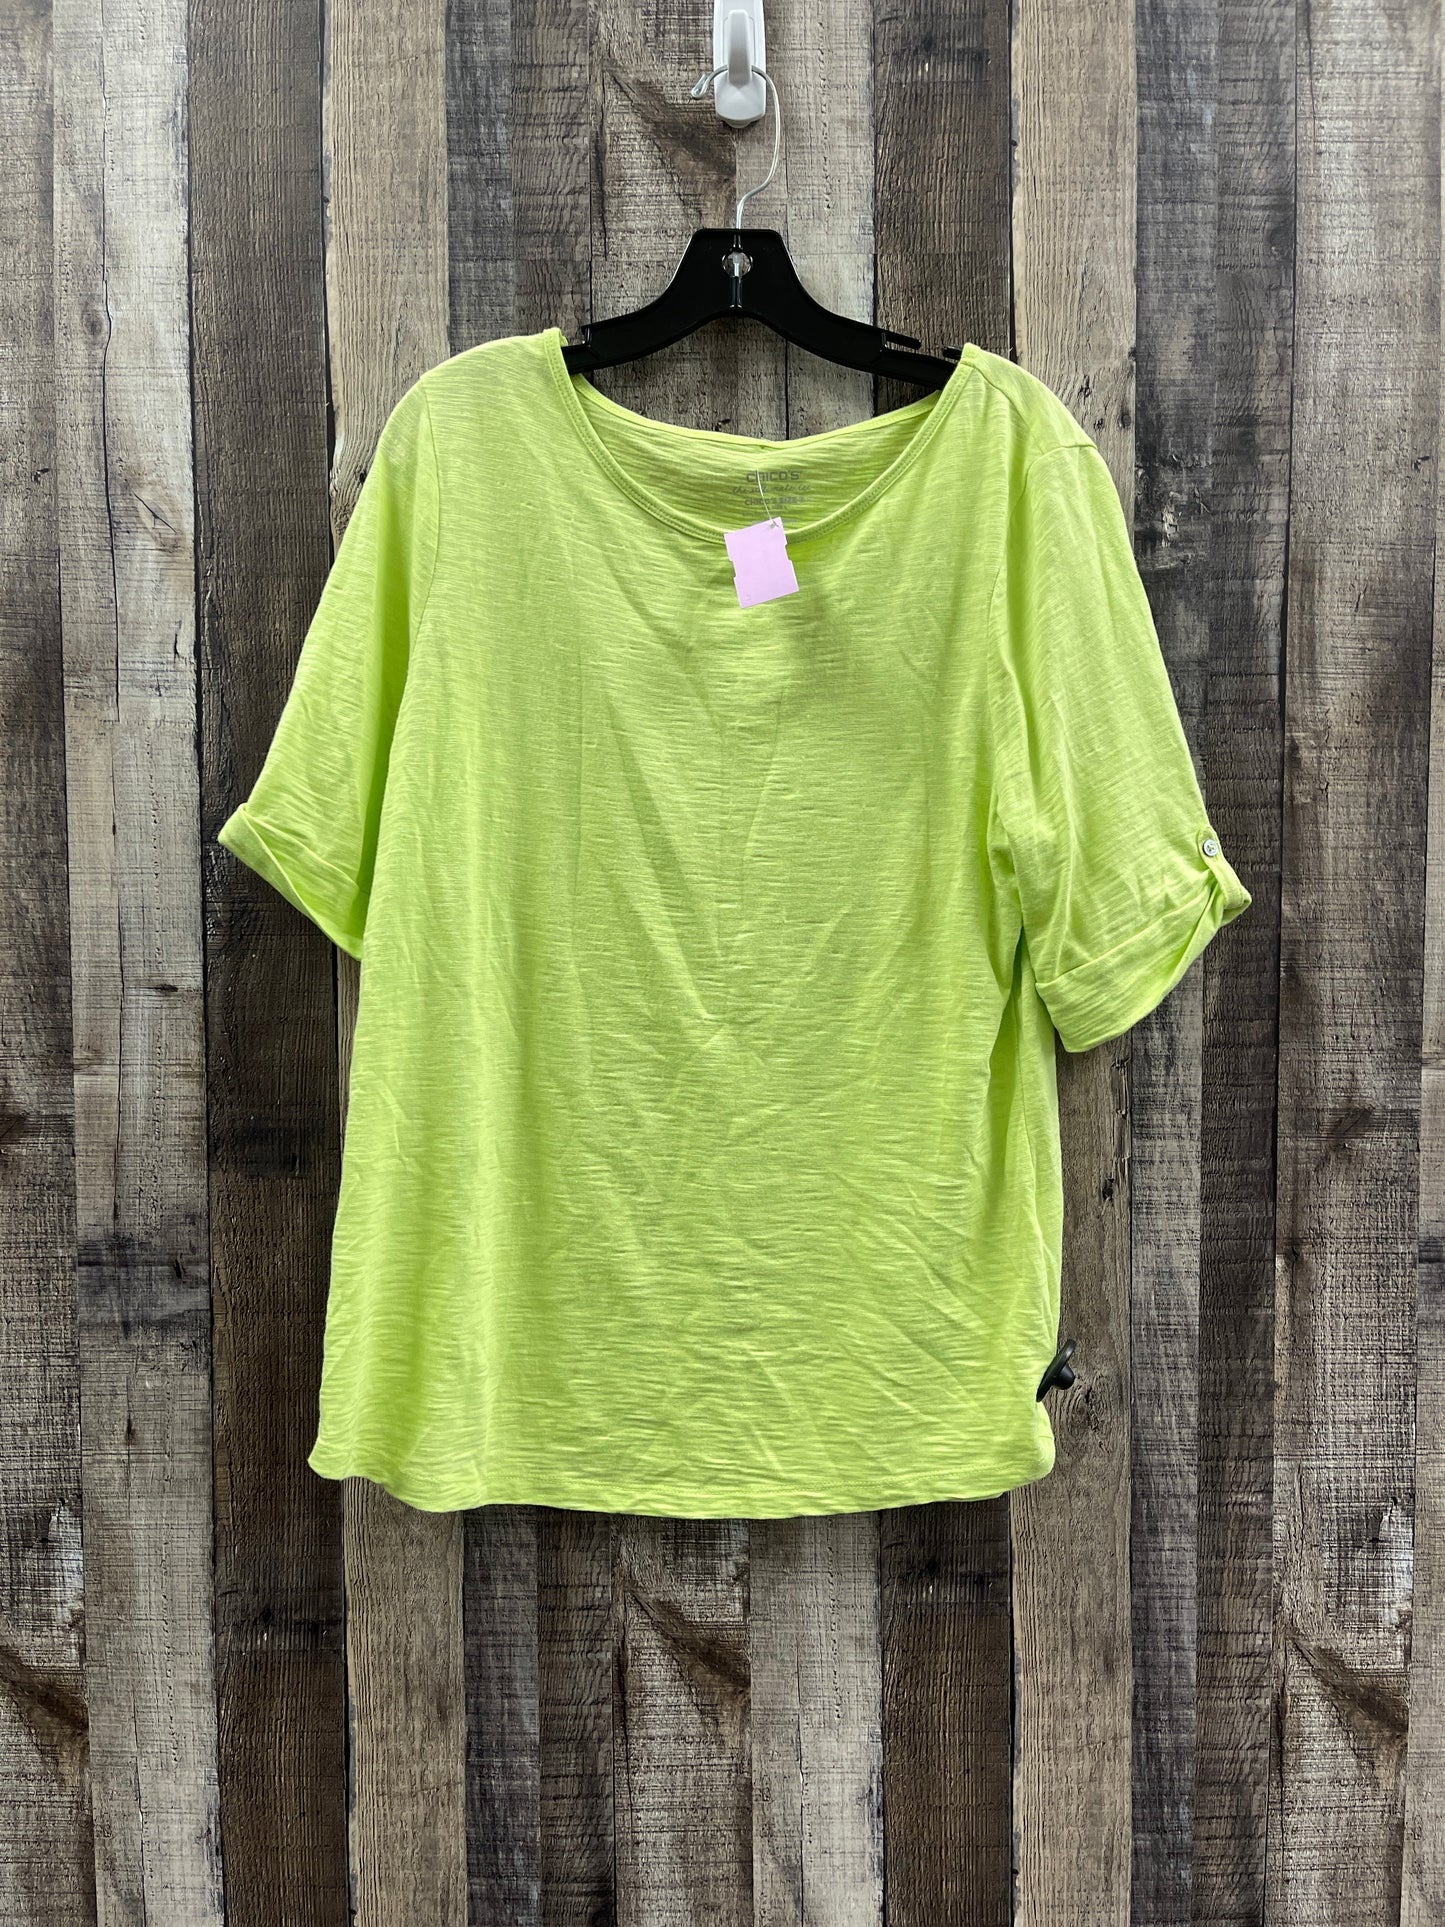 Green Top Short Sleeve Chicos, Size L